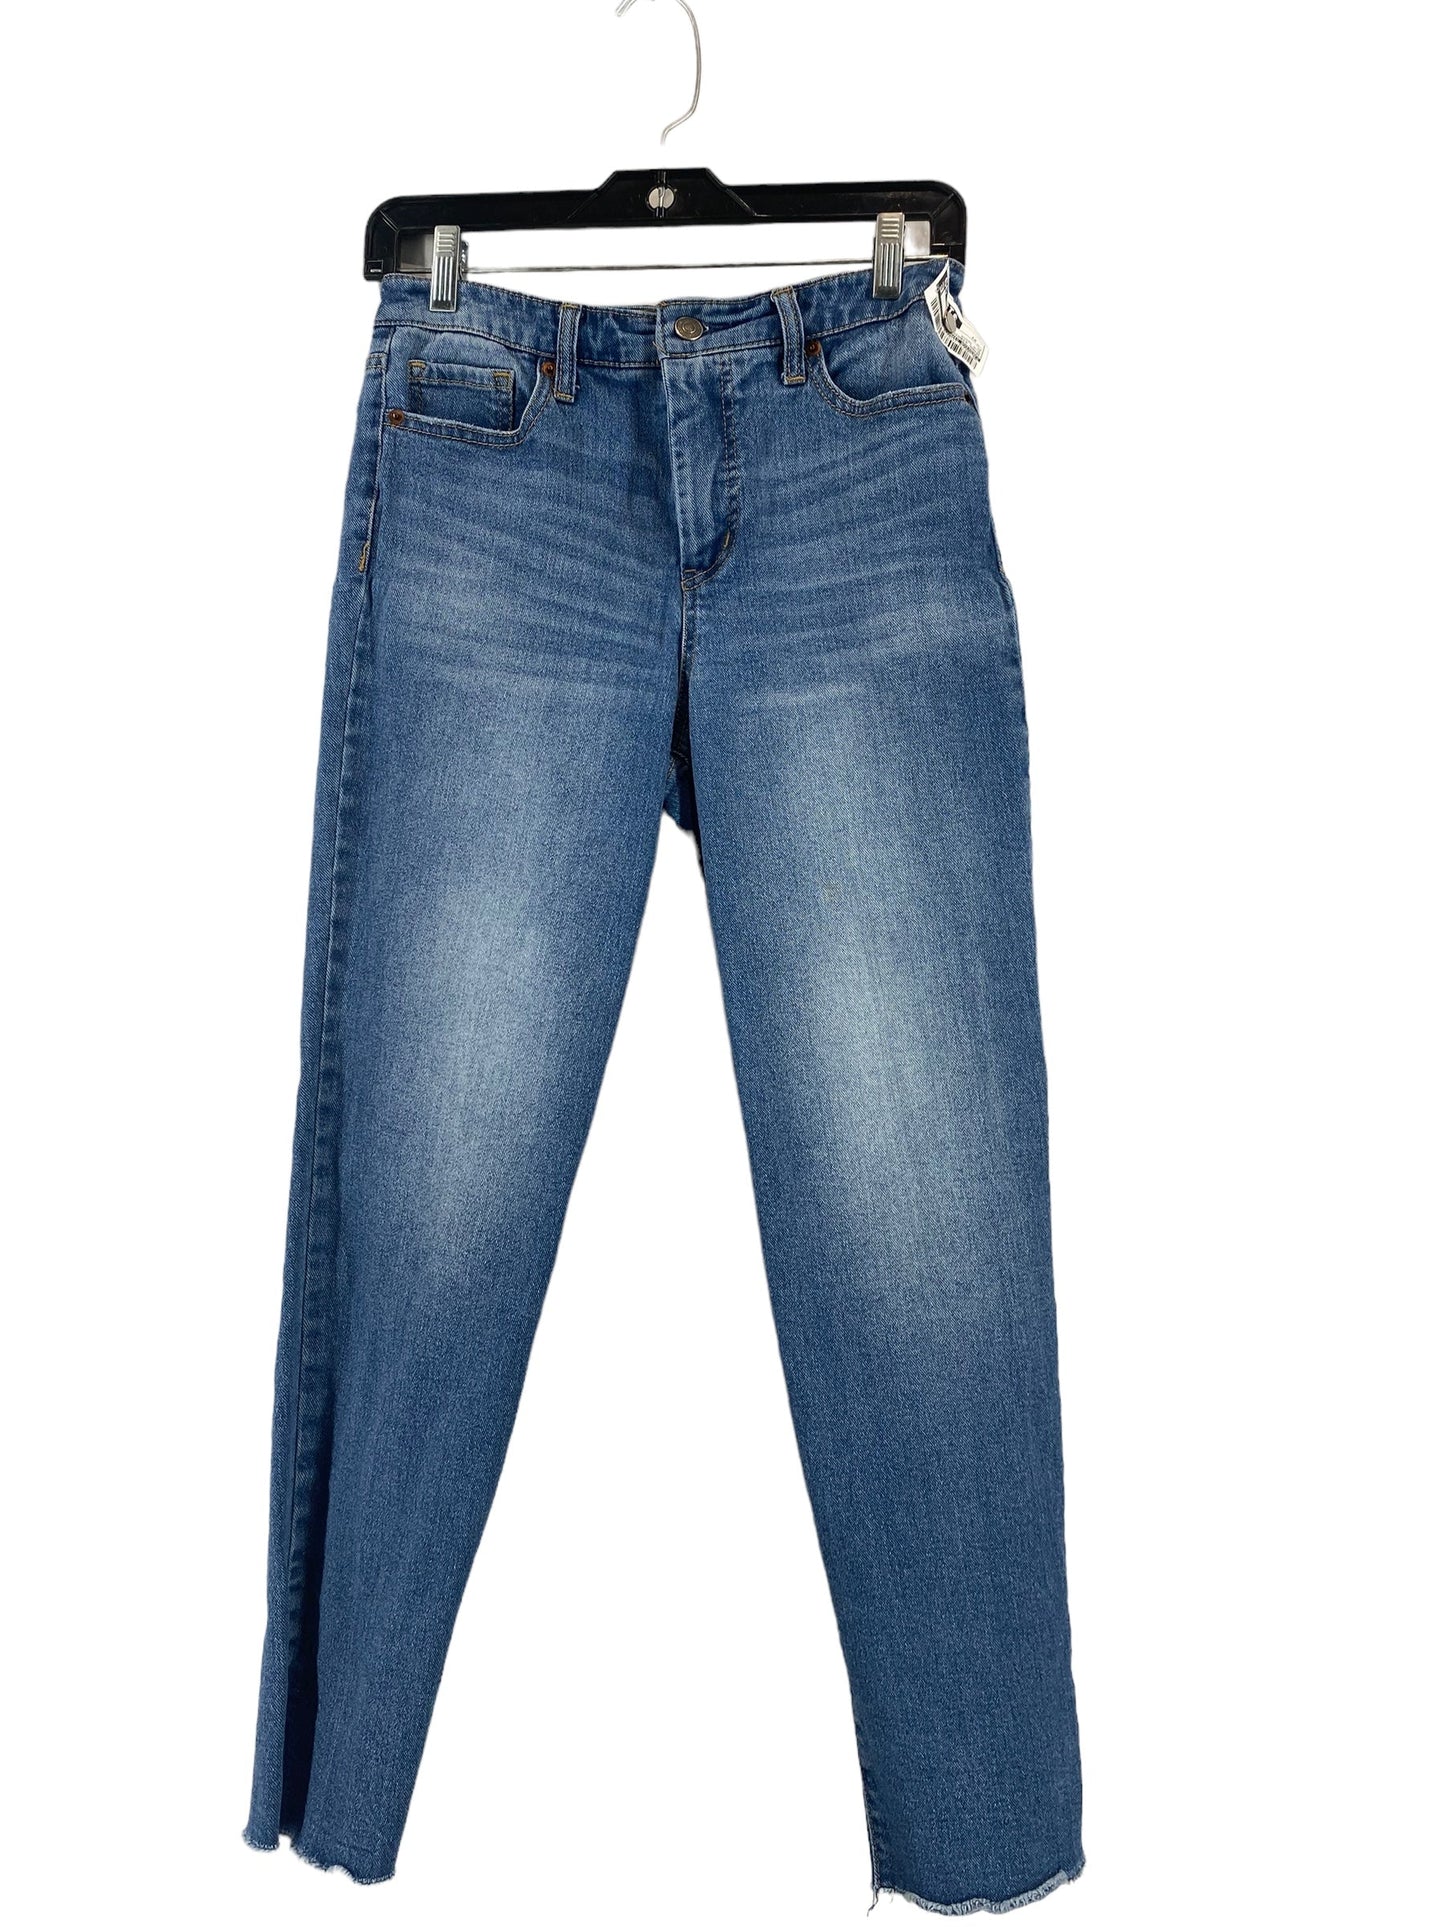 Jeans Straight By Jessica Simpson  Size: 27